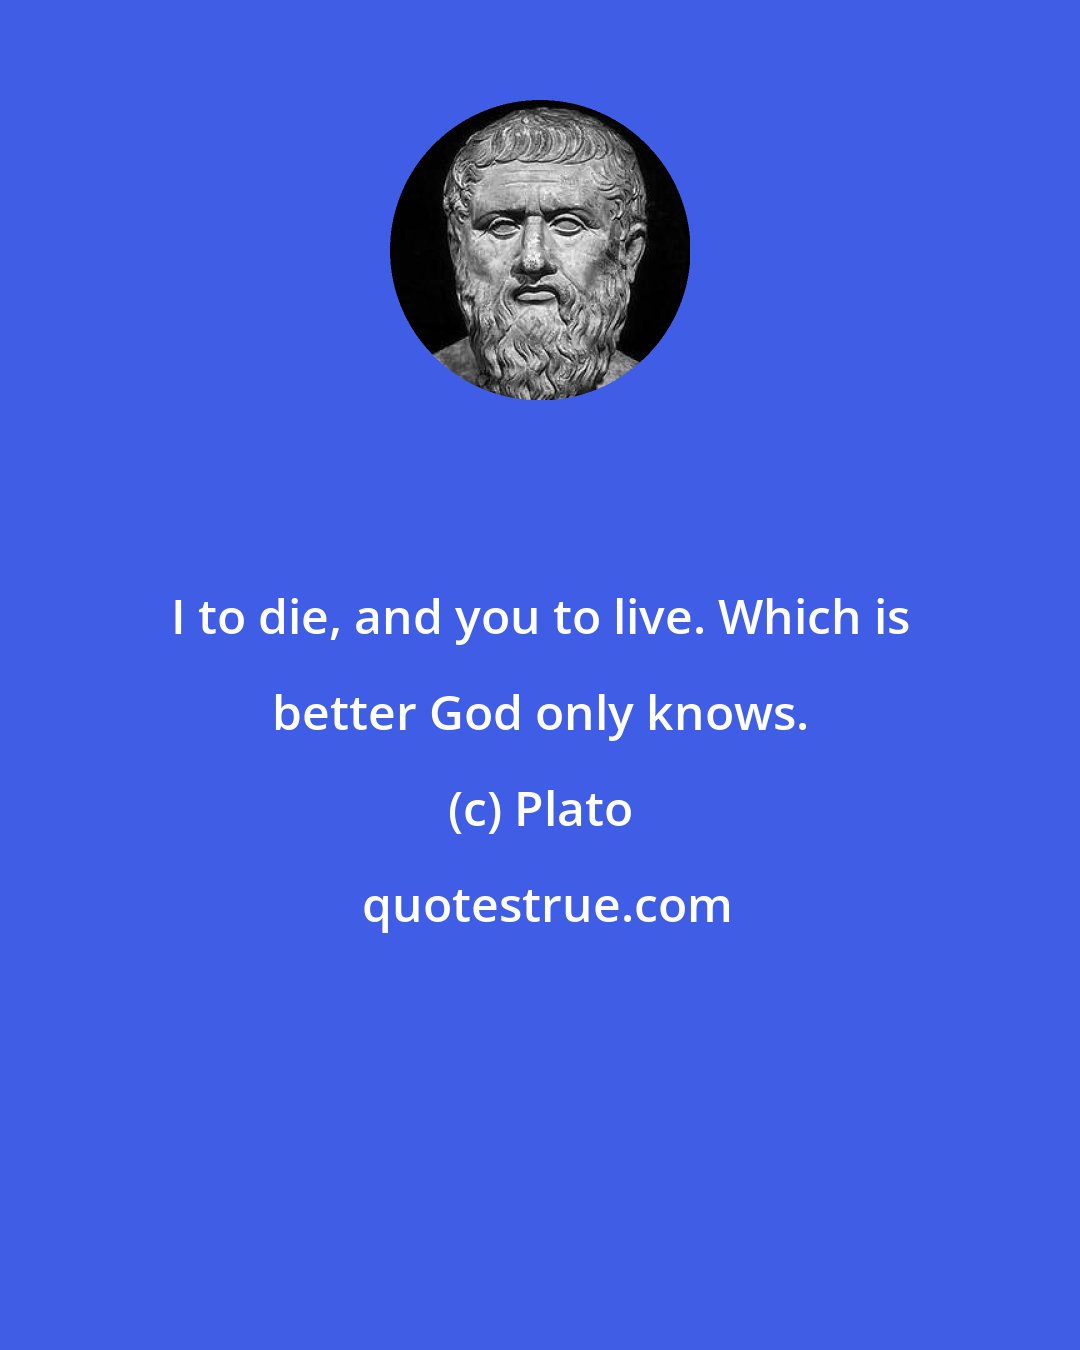 Plato: I to die, and you to live. Which is better God only knows.